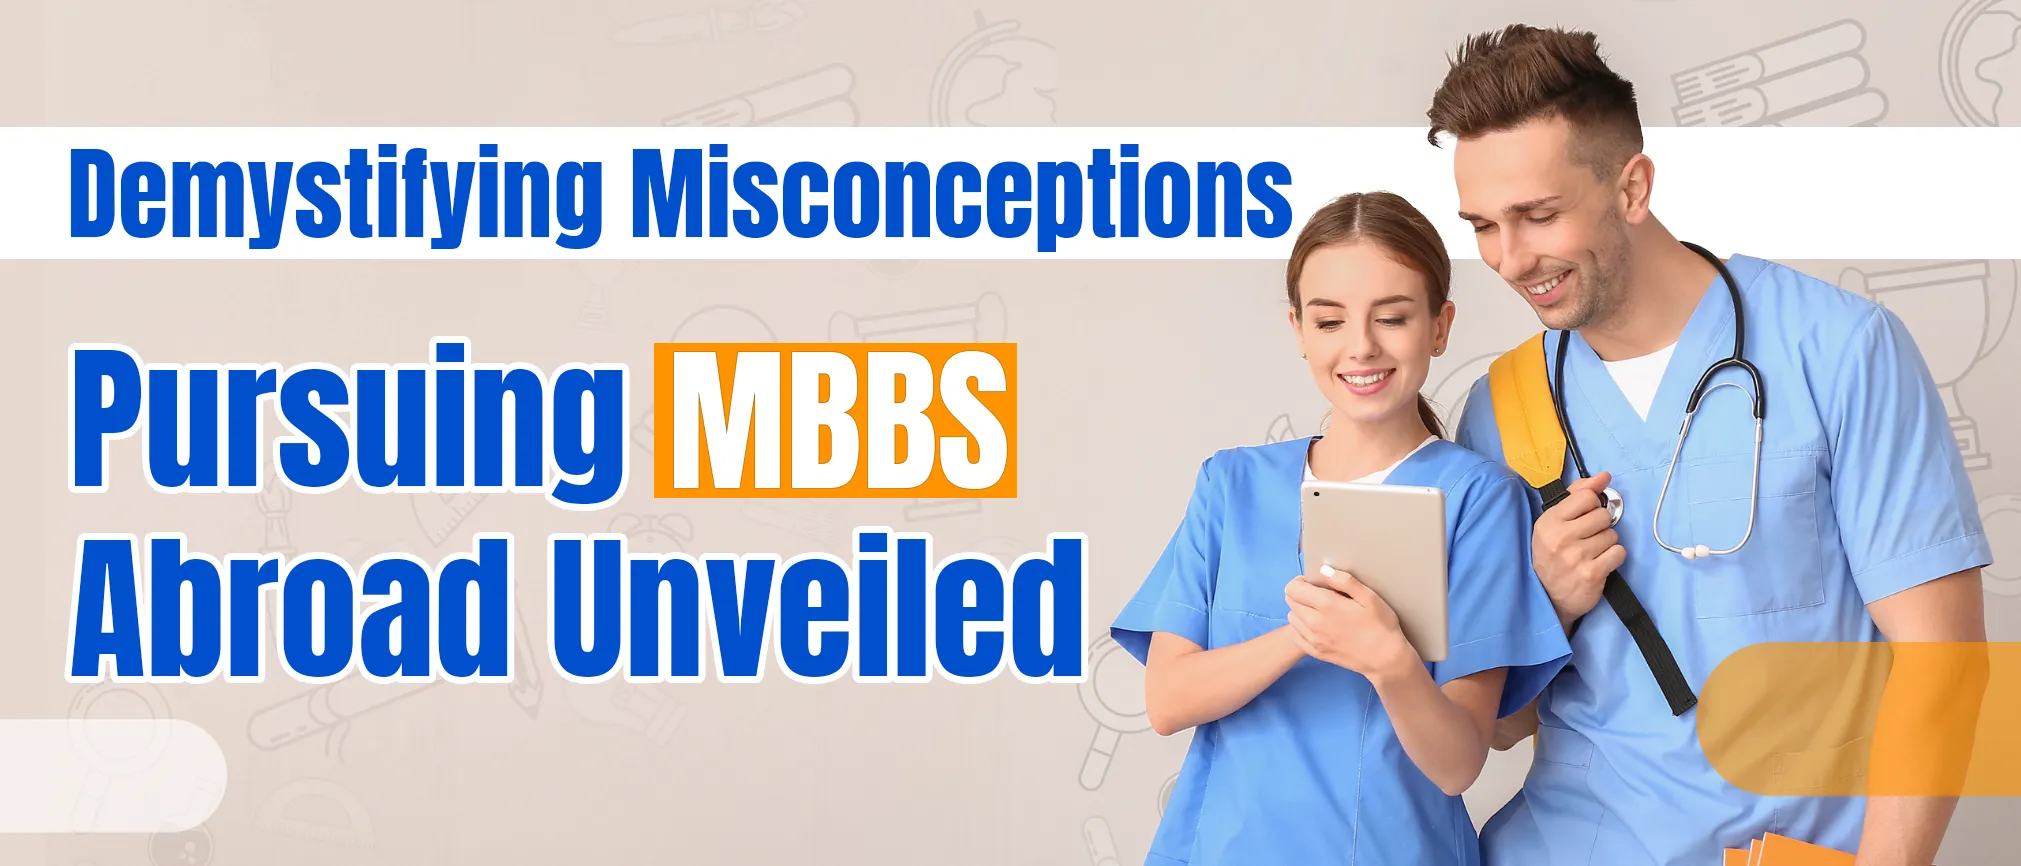 Demystifying Misconceptions: Pursuing MBBS Abroad Unveiled